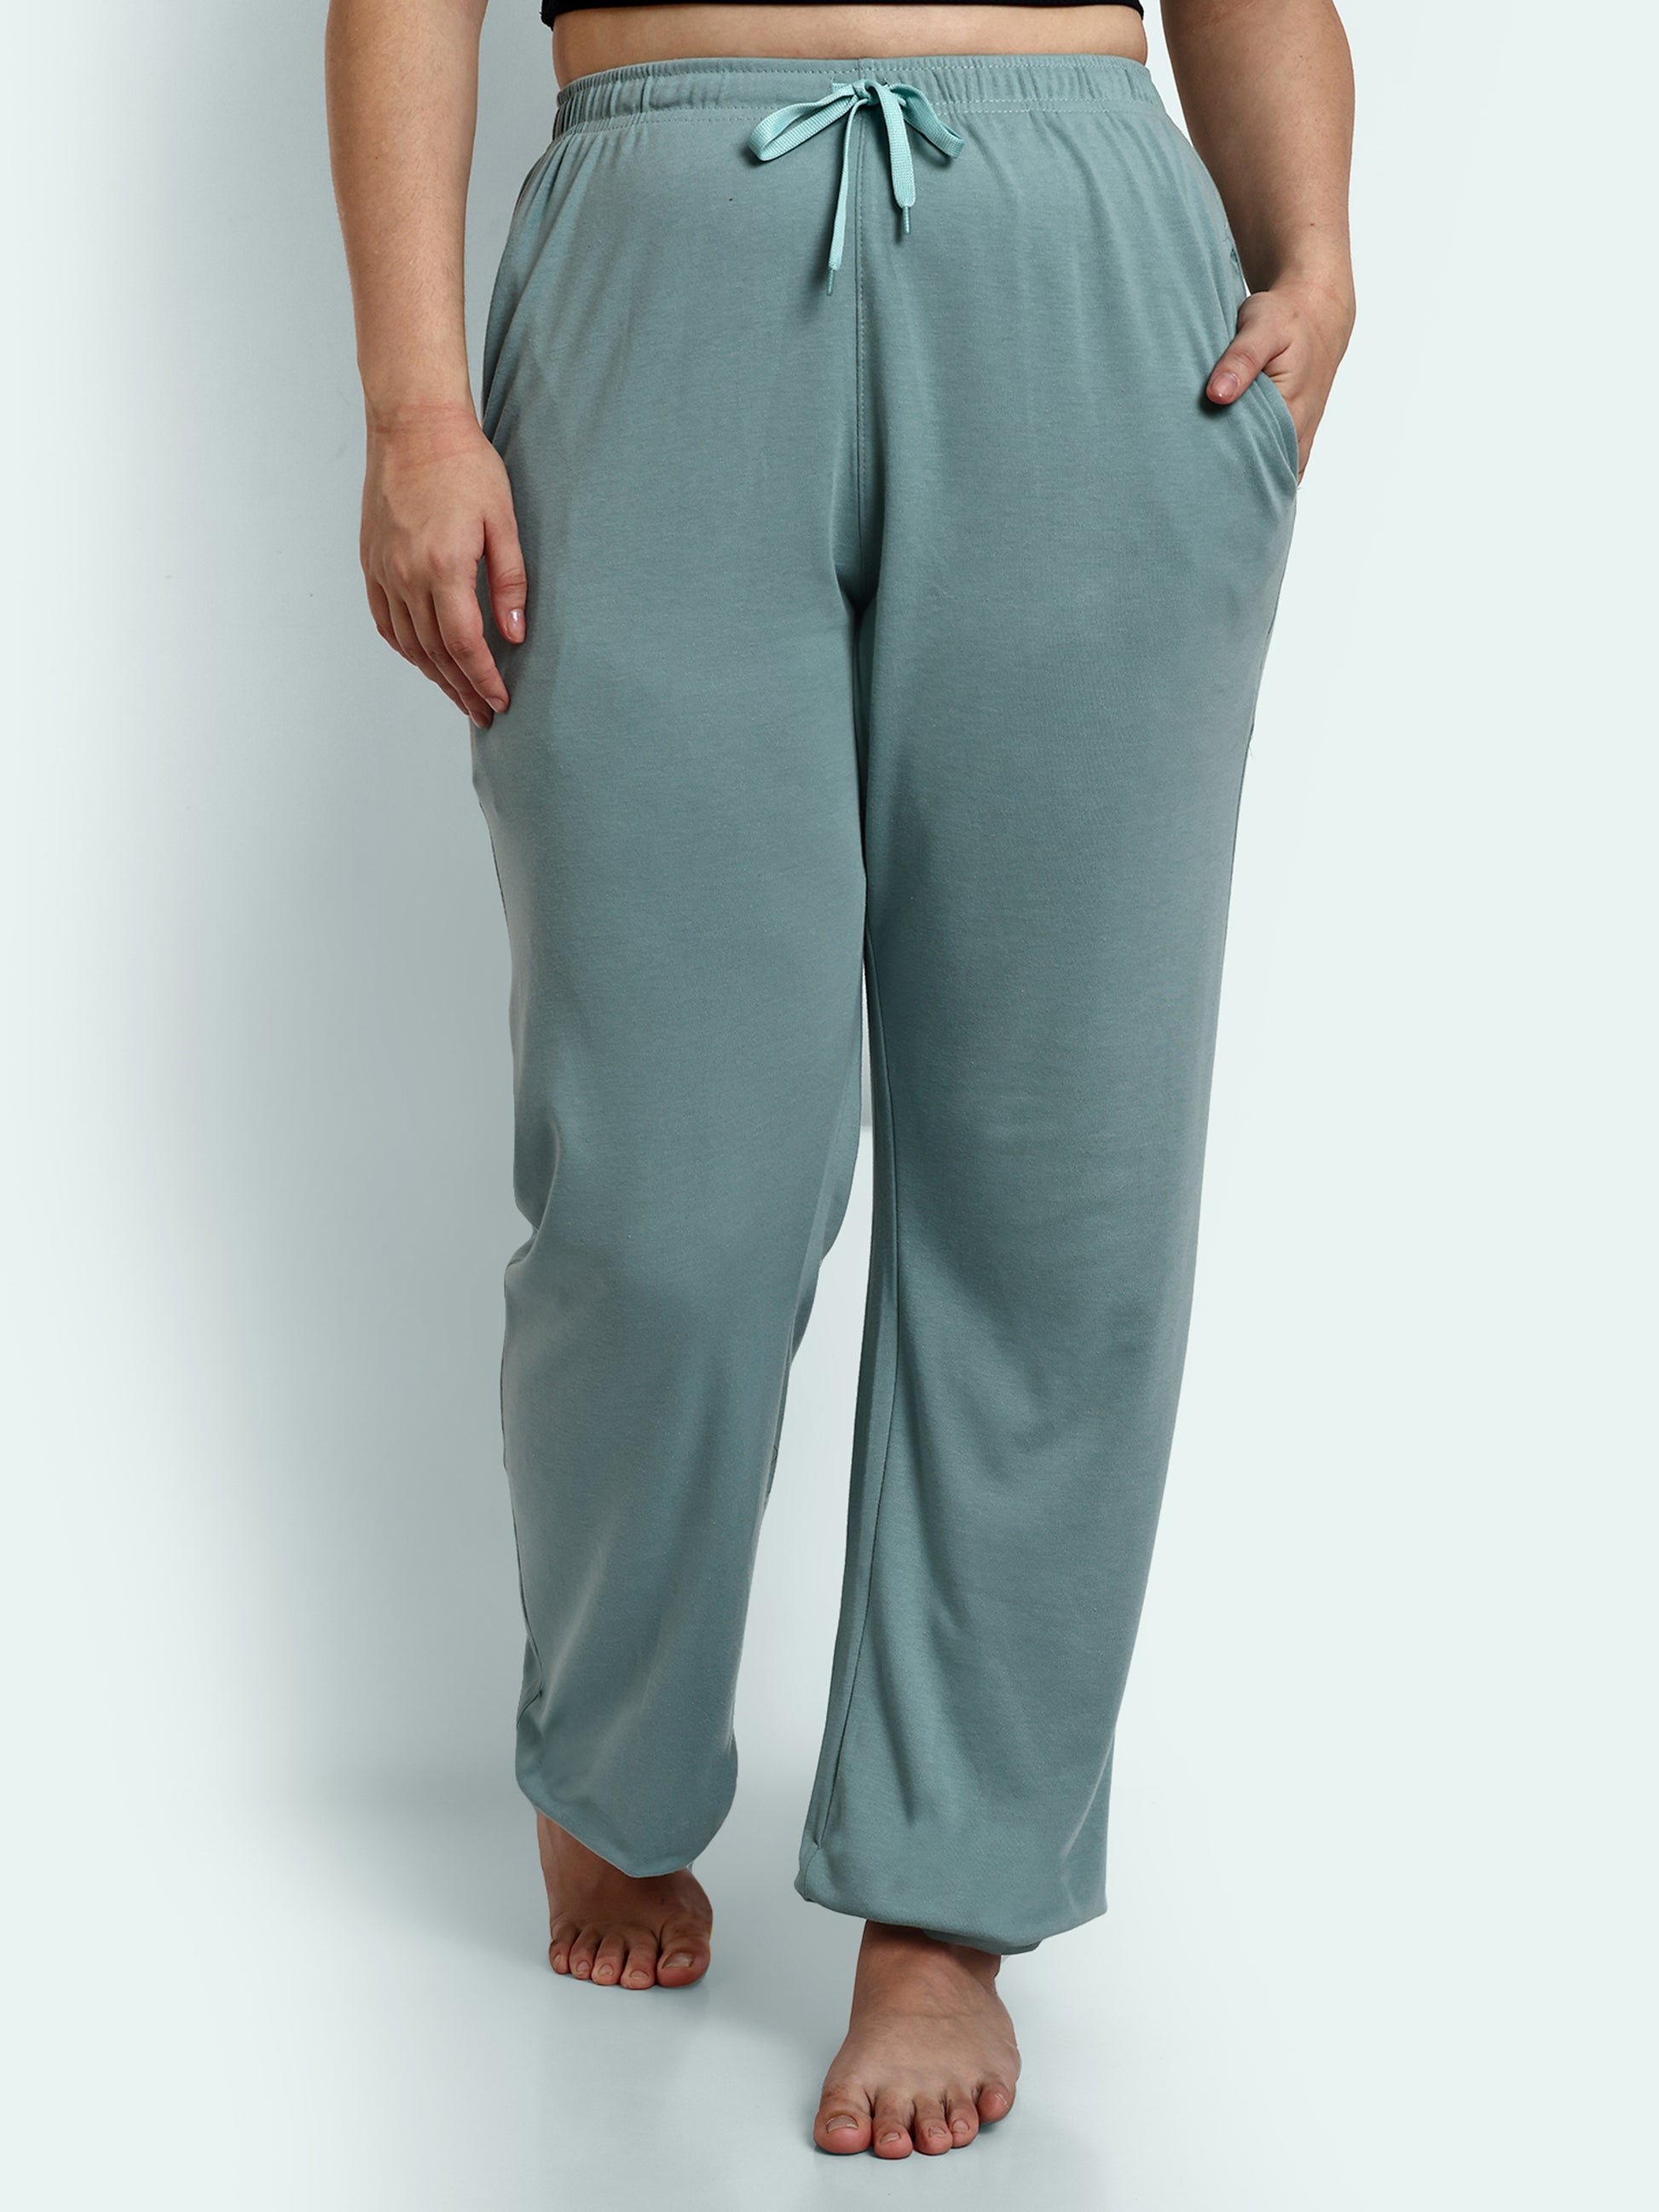 Comfortable High Waist Cotton Flared Pants For Women in Sage online at best prices